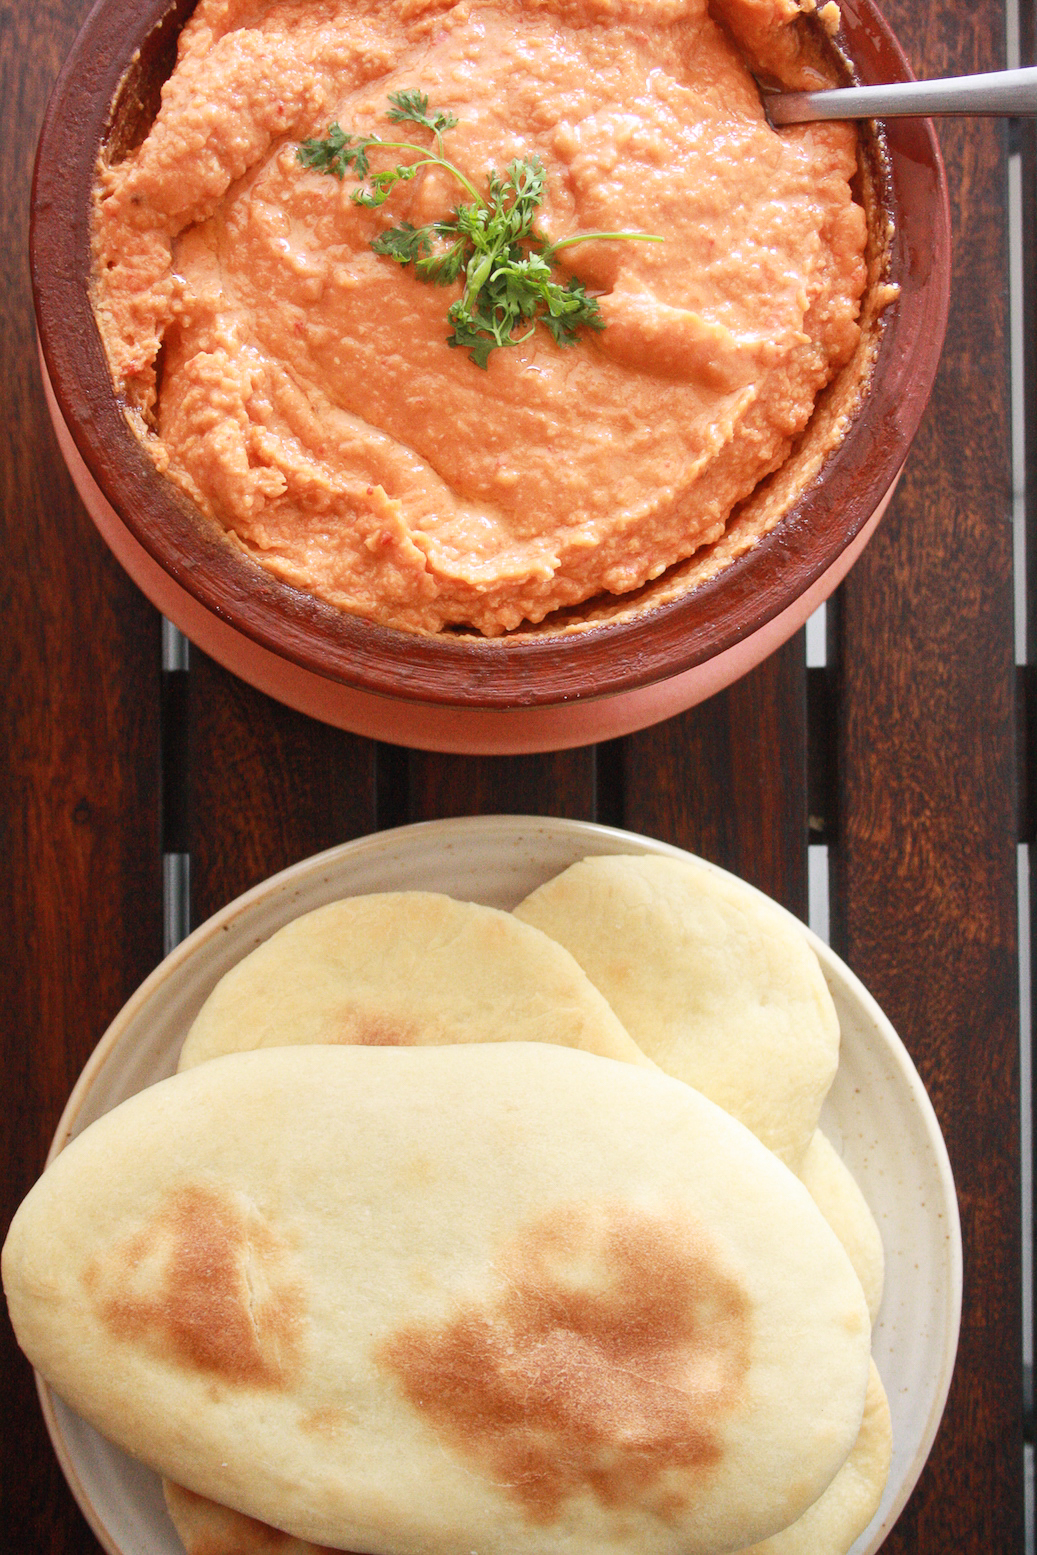 Classic hummus taken up a notch with juicy roasted peppers, served with soft and fluffy homemade pita!